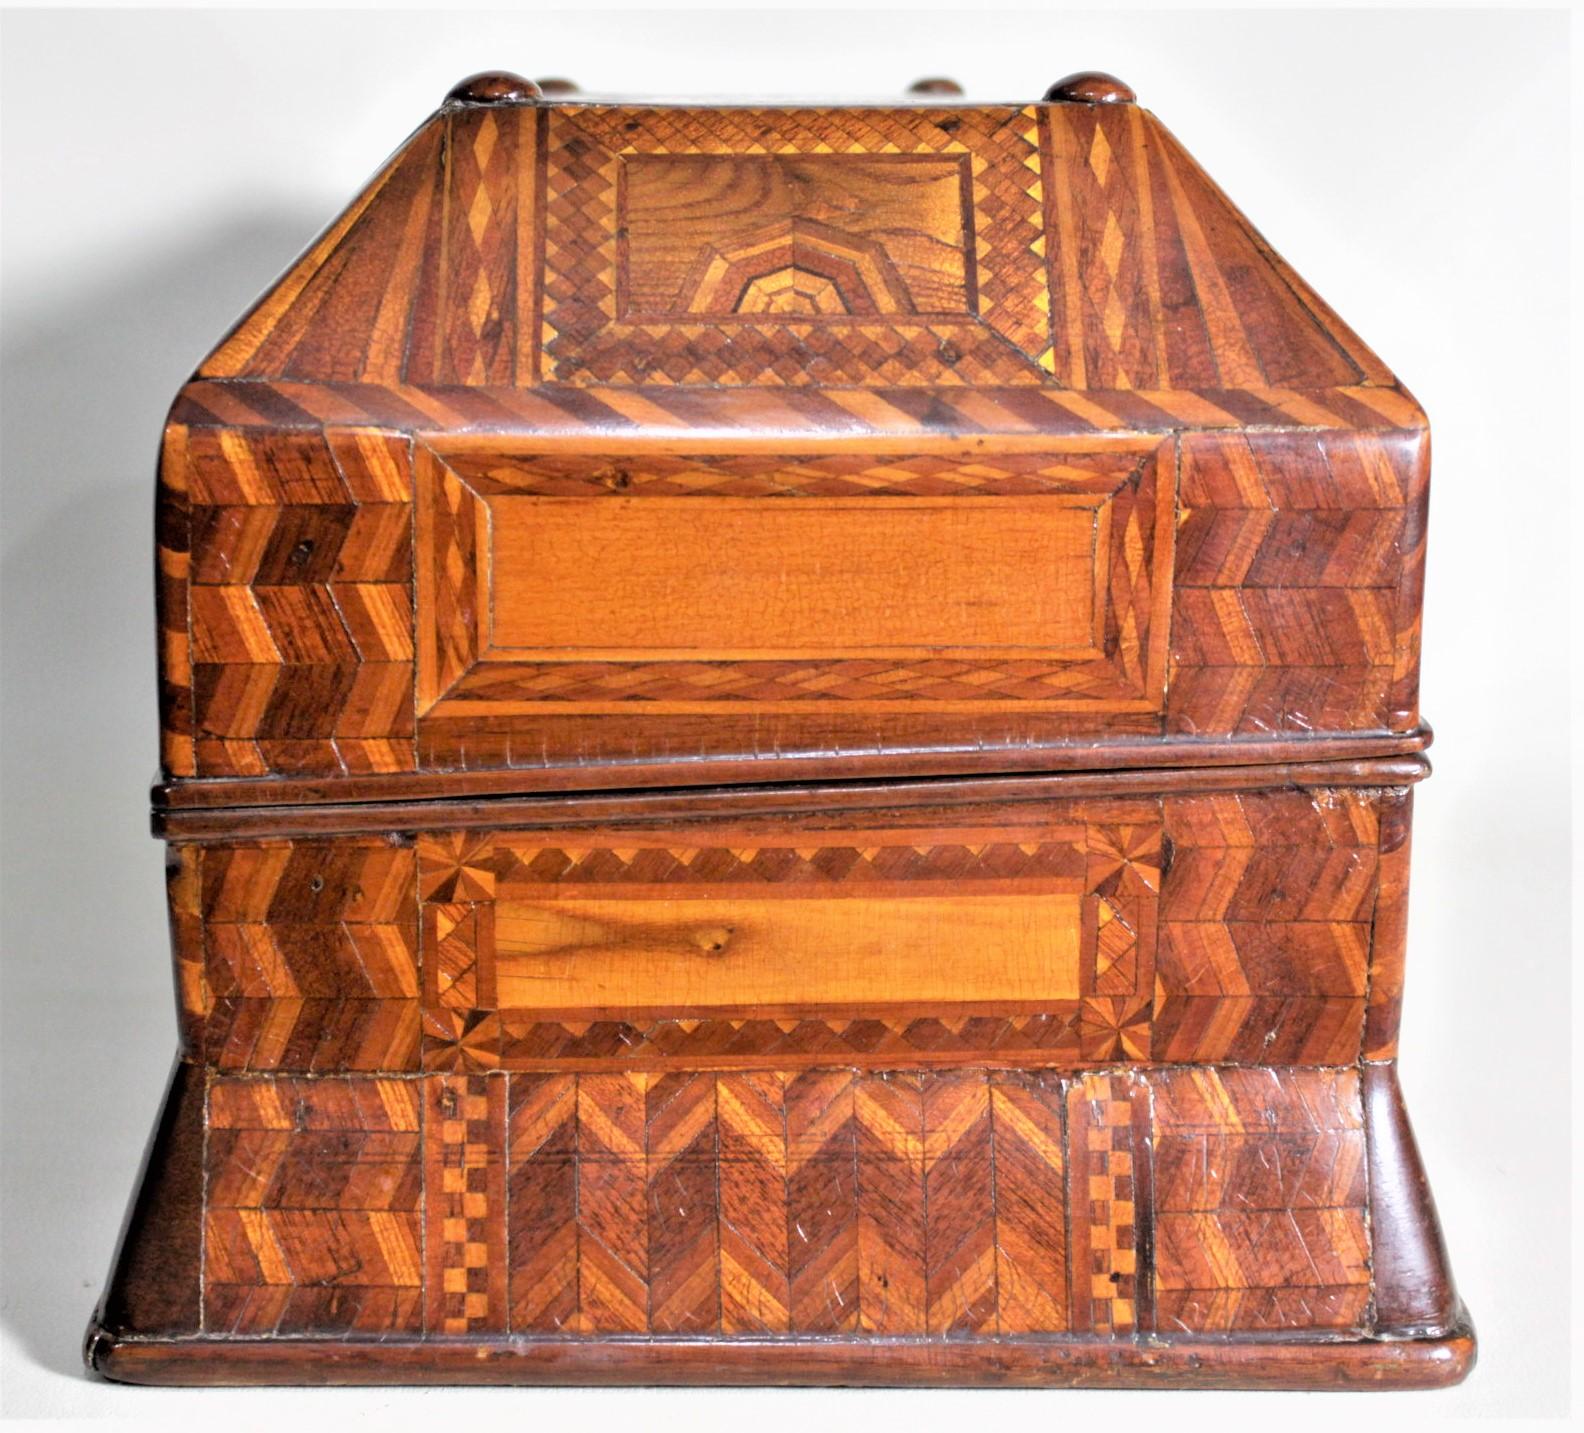 Superb Antique Folk Art Parquetry Casket Styled Writing Box or Lap Desk In Good Condition For Sale In Hamilton, Ontario